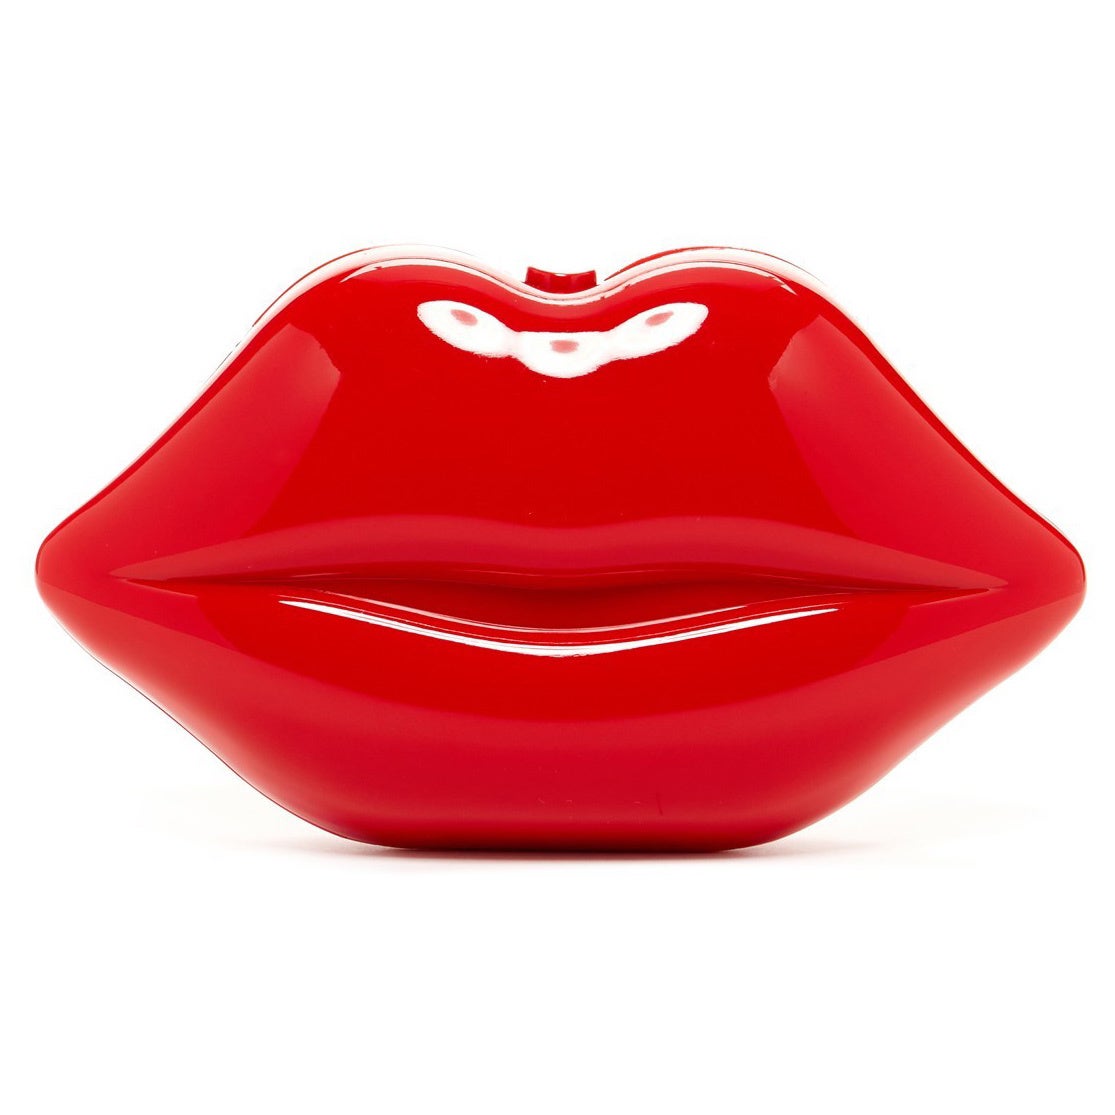 Lady in Red: 15 Finds That Will Make Your Valentine’s Day Pop!